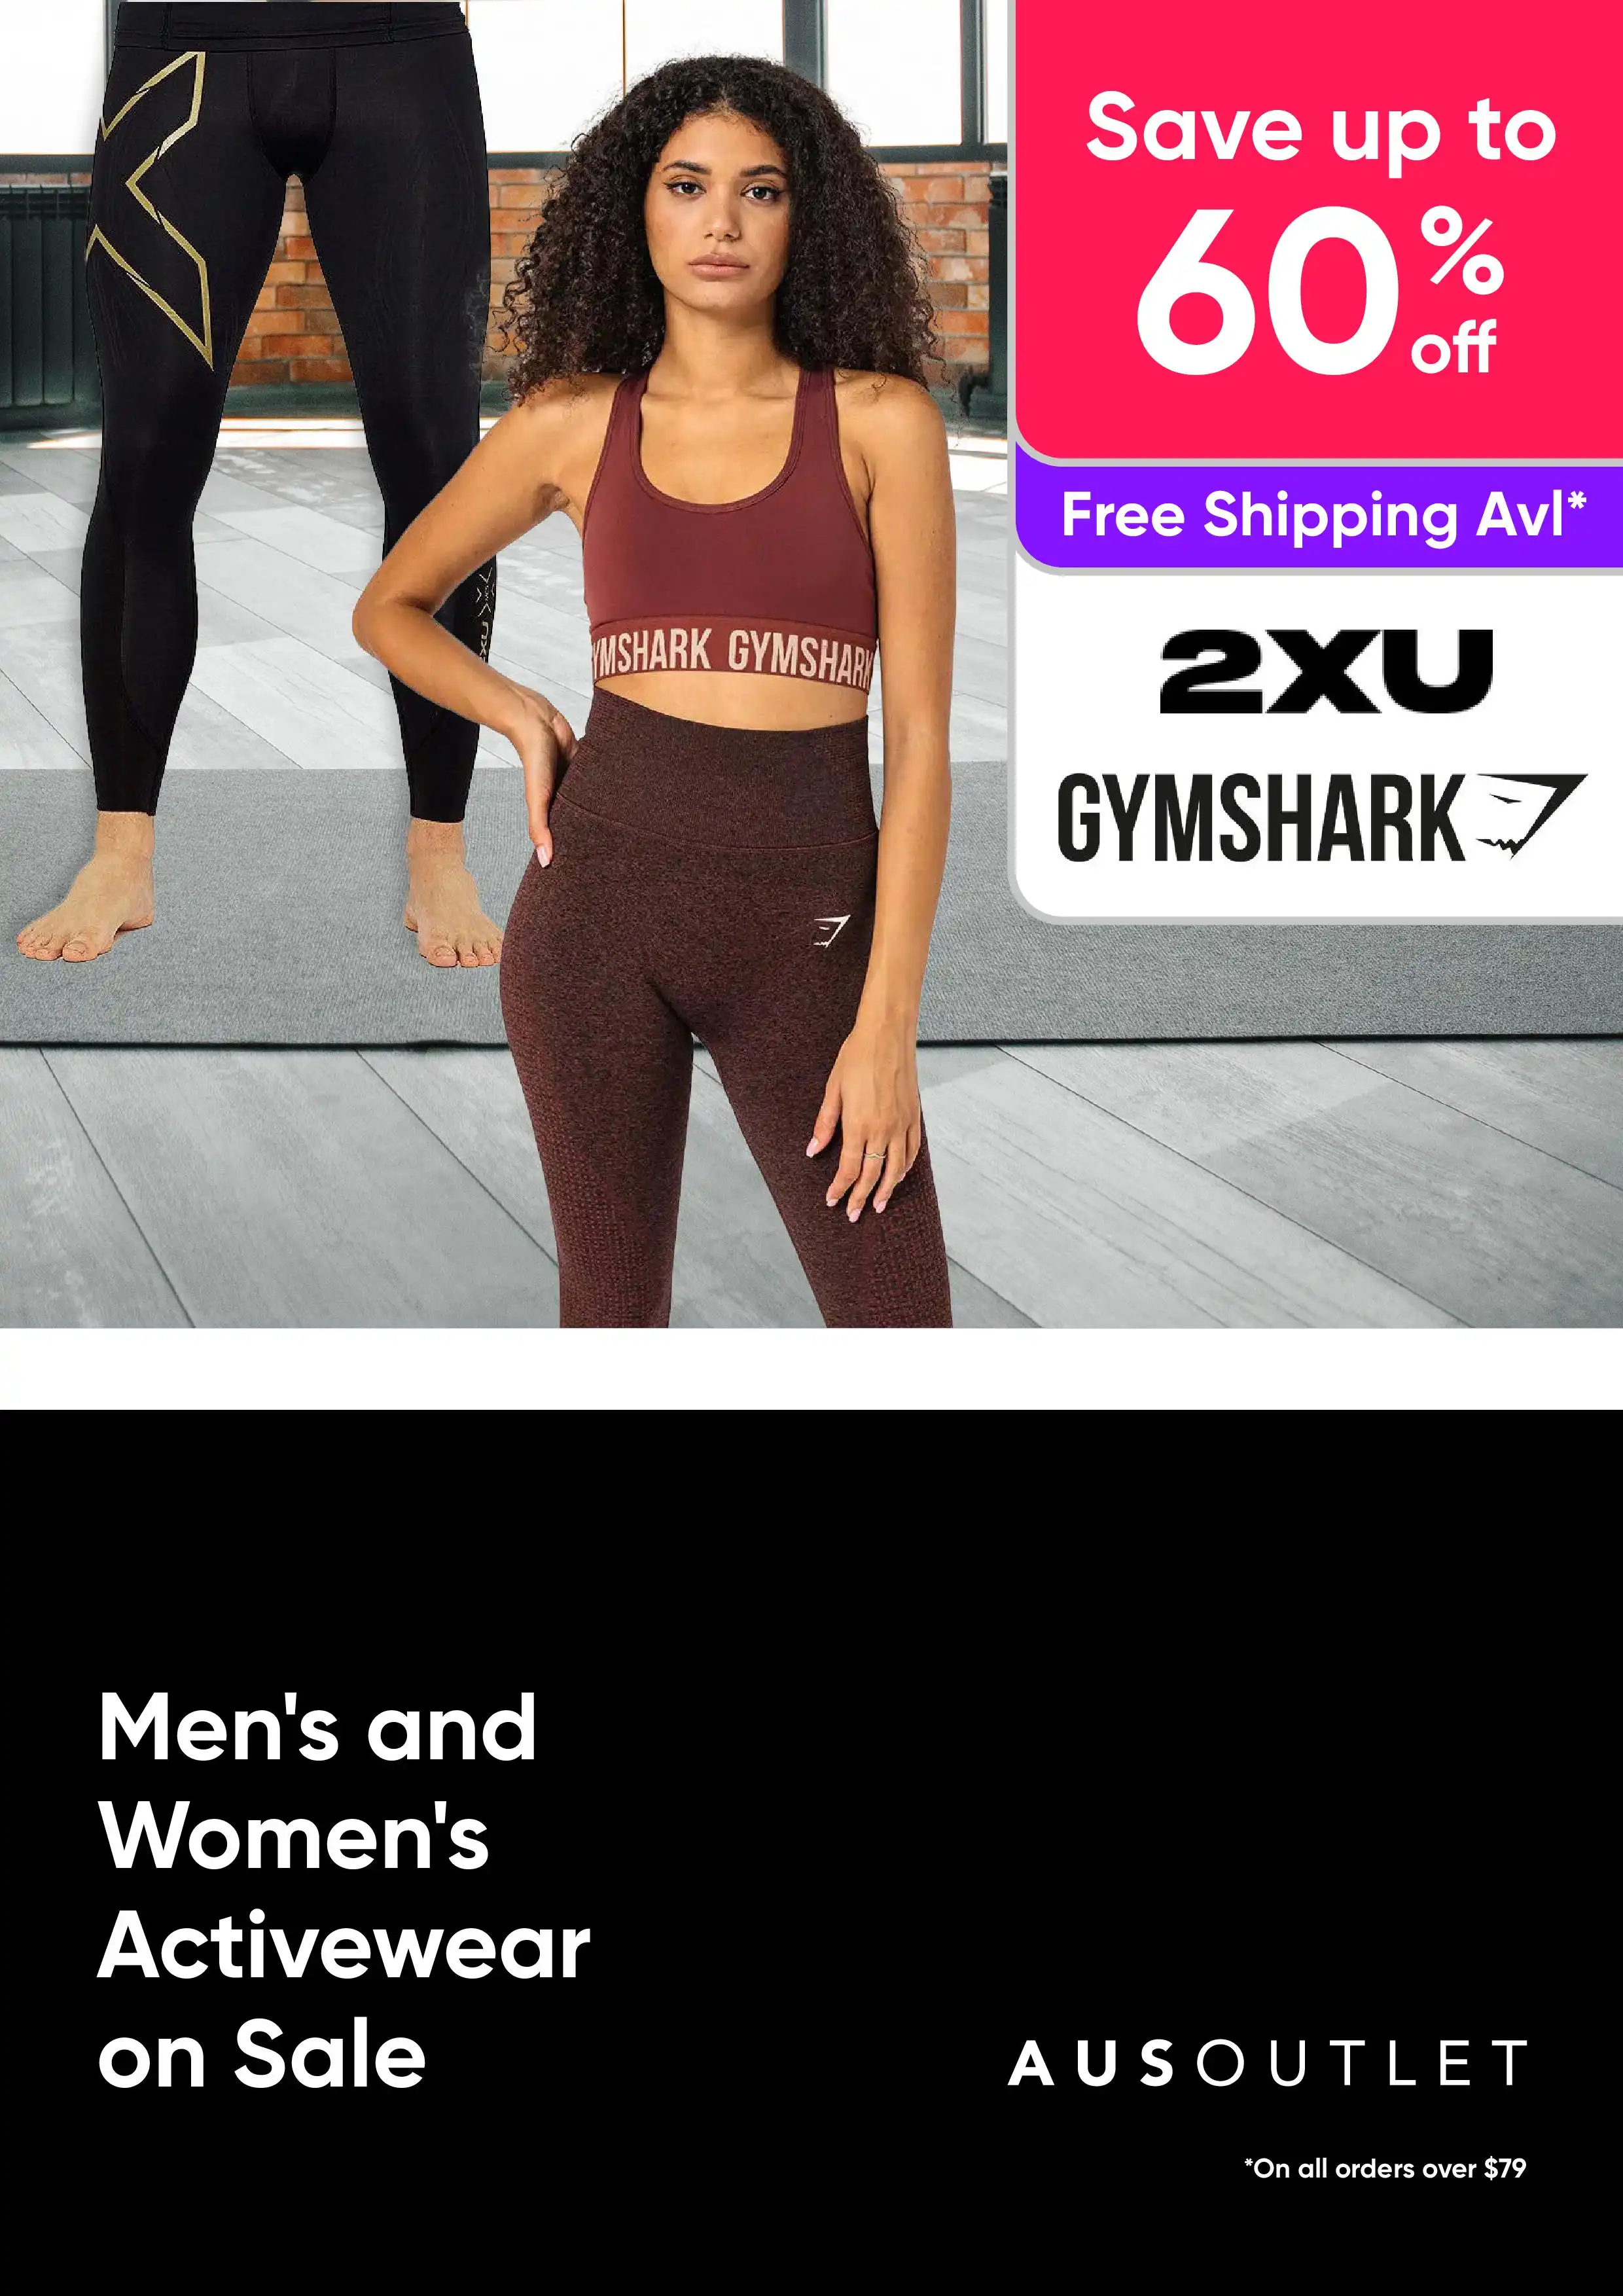 Men's and Women's Activewear on Sale - Save Up to 60% off 2XU, Gymshark and More